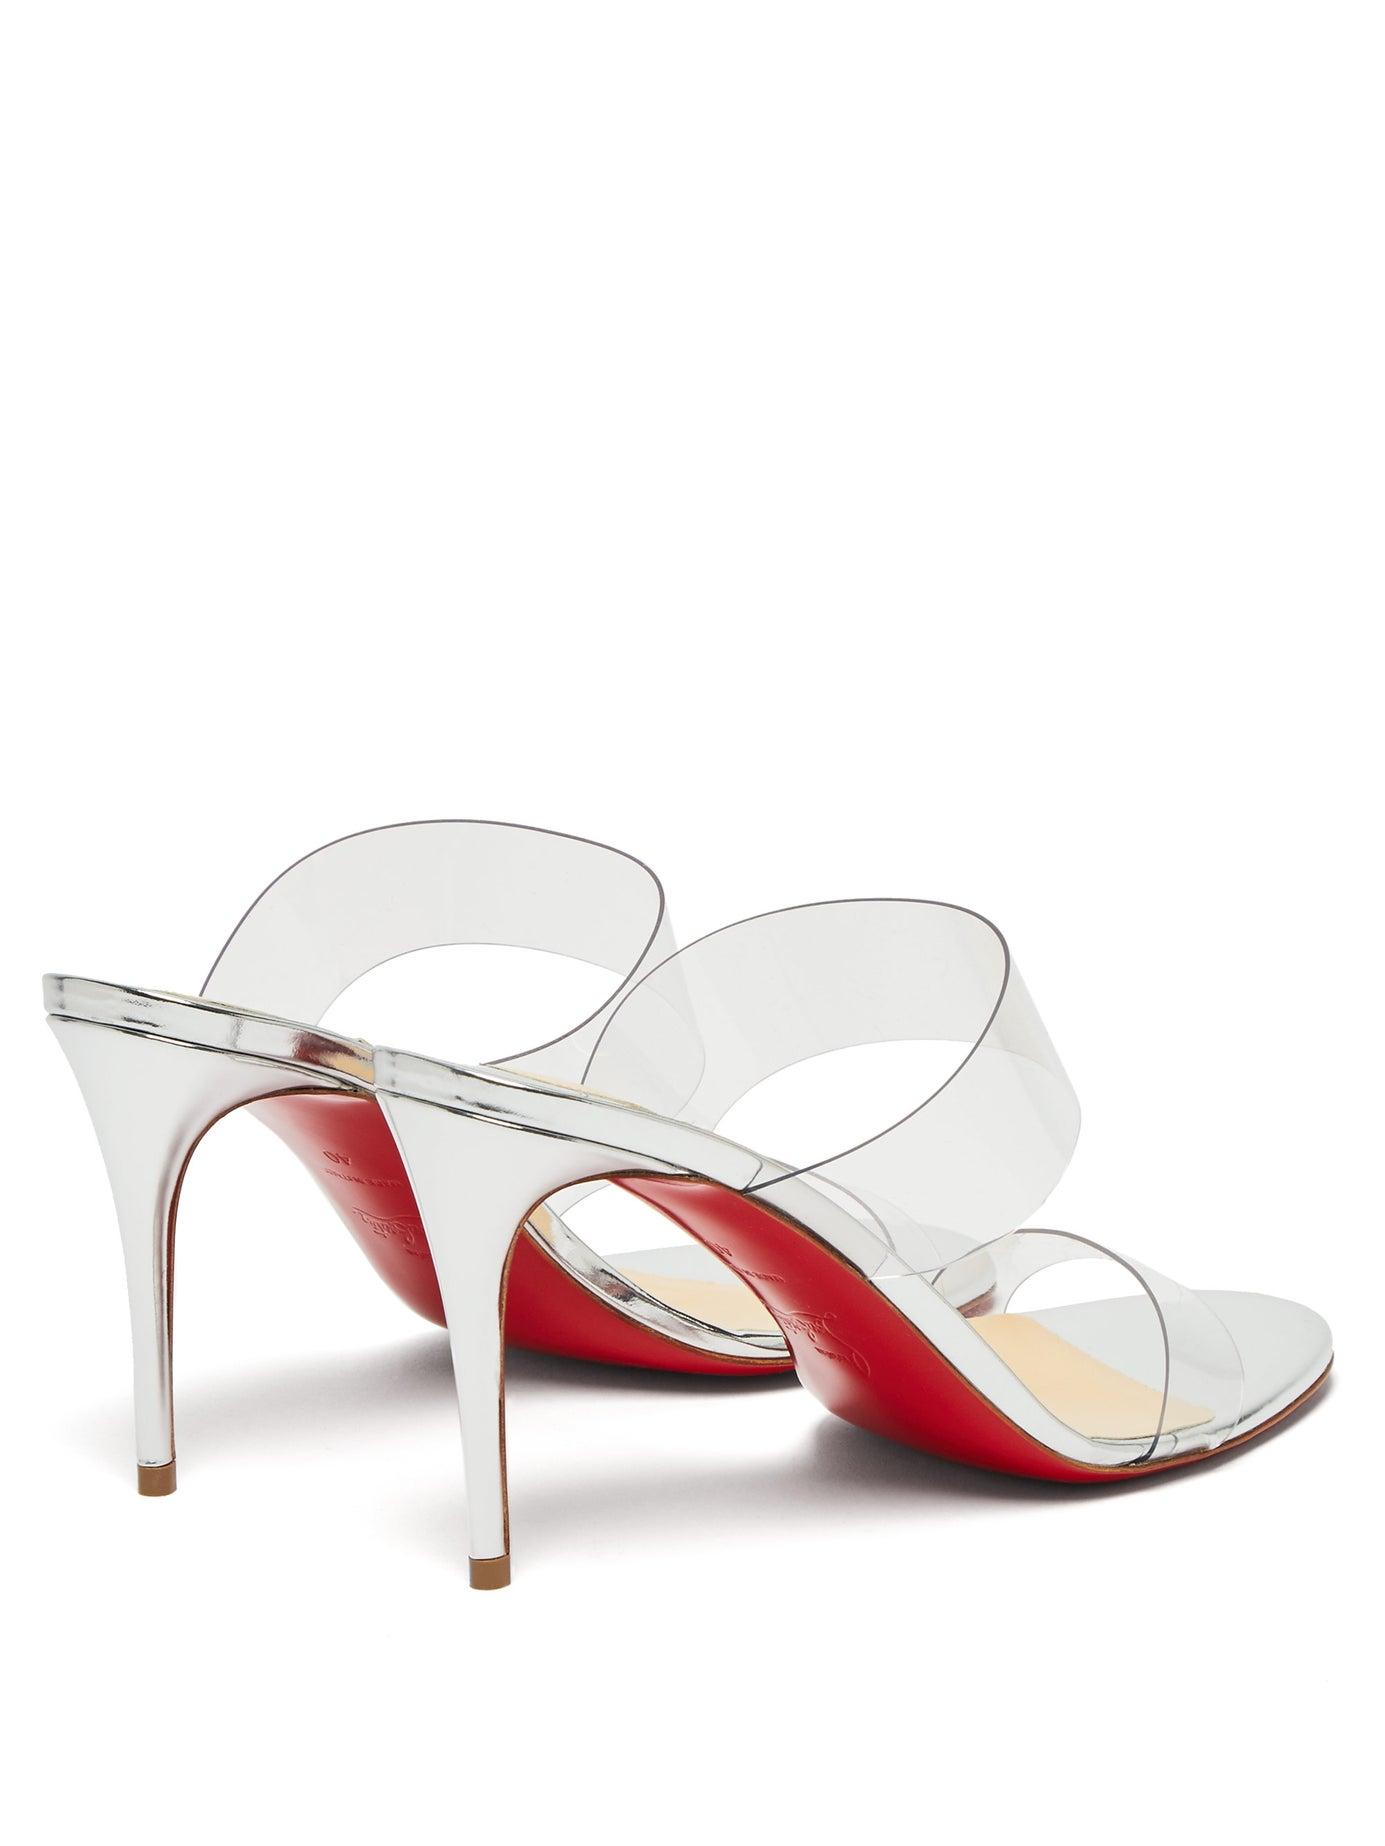 Christian Louboutin Women's Just Nothing 85 Sandals